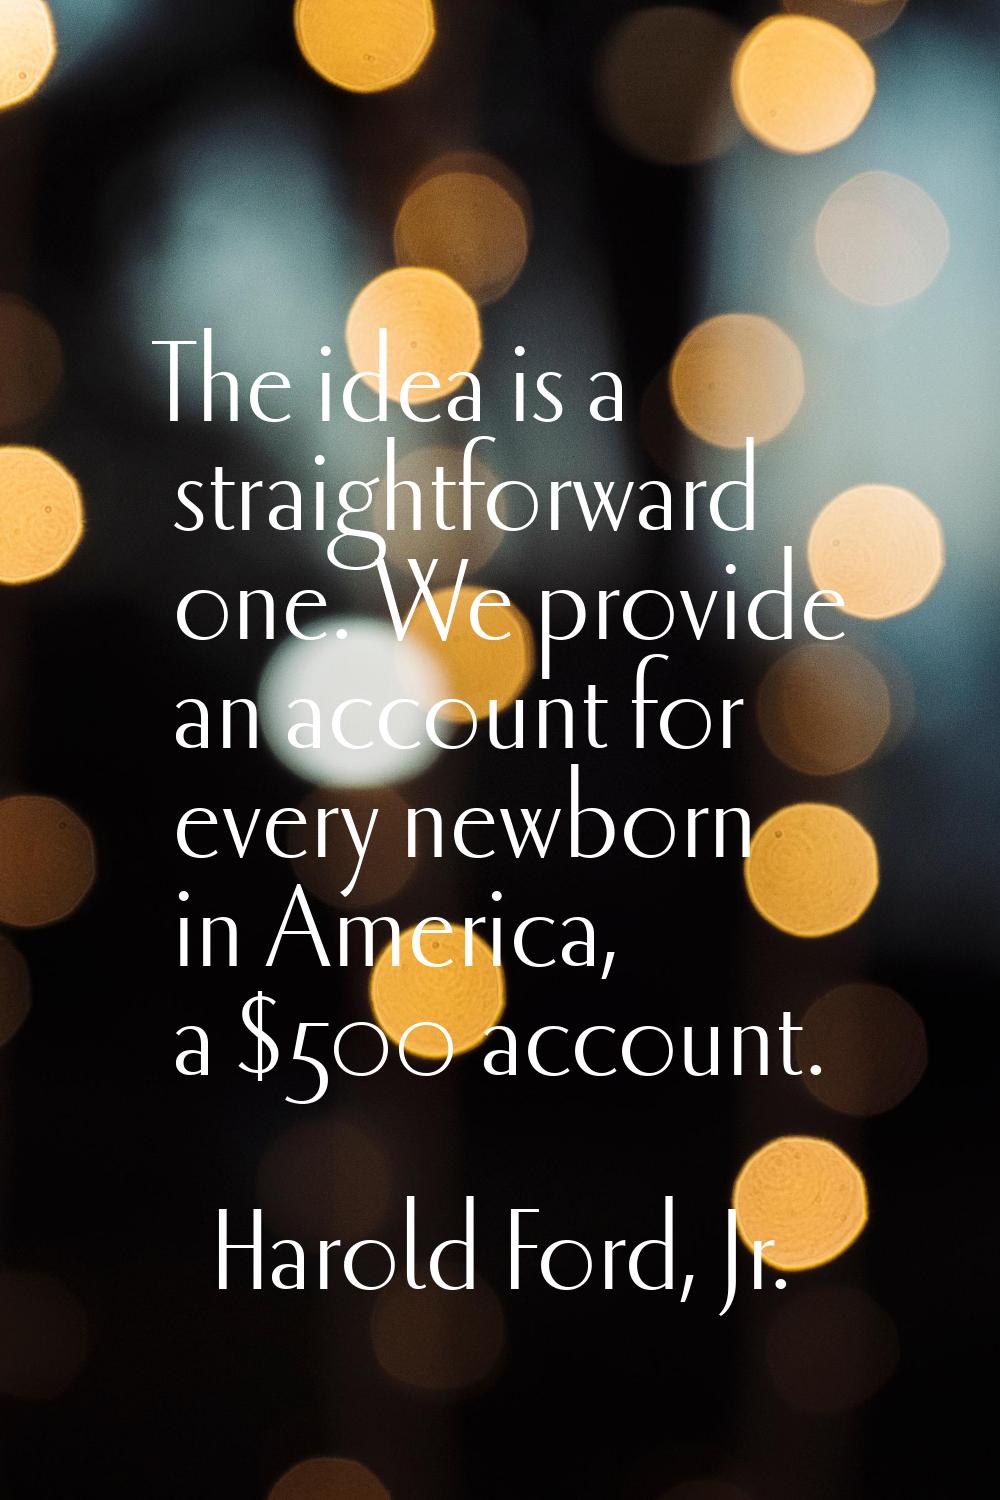 The idea is a straightforward one. We provide an account for every newborn in America, a $500 accou